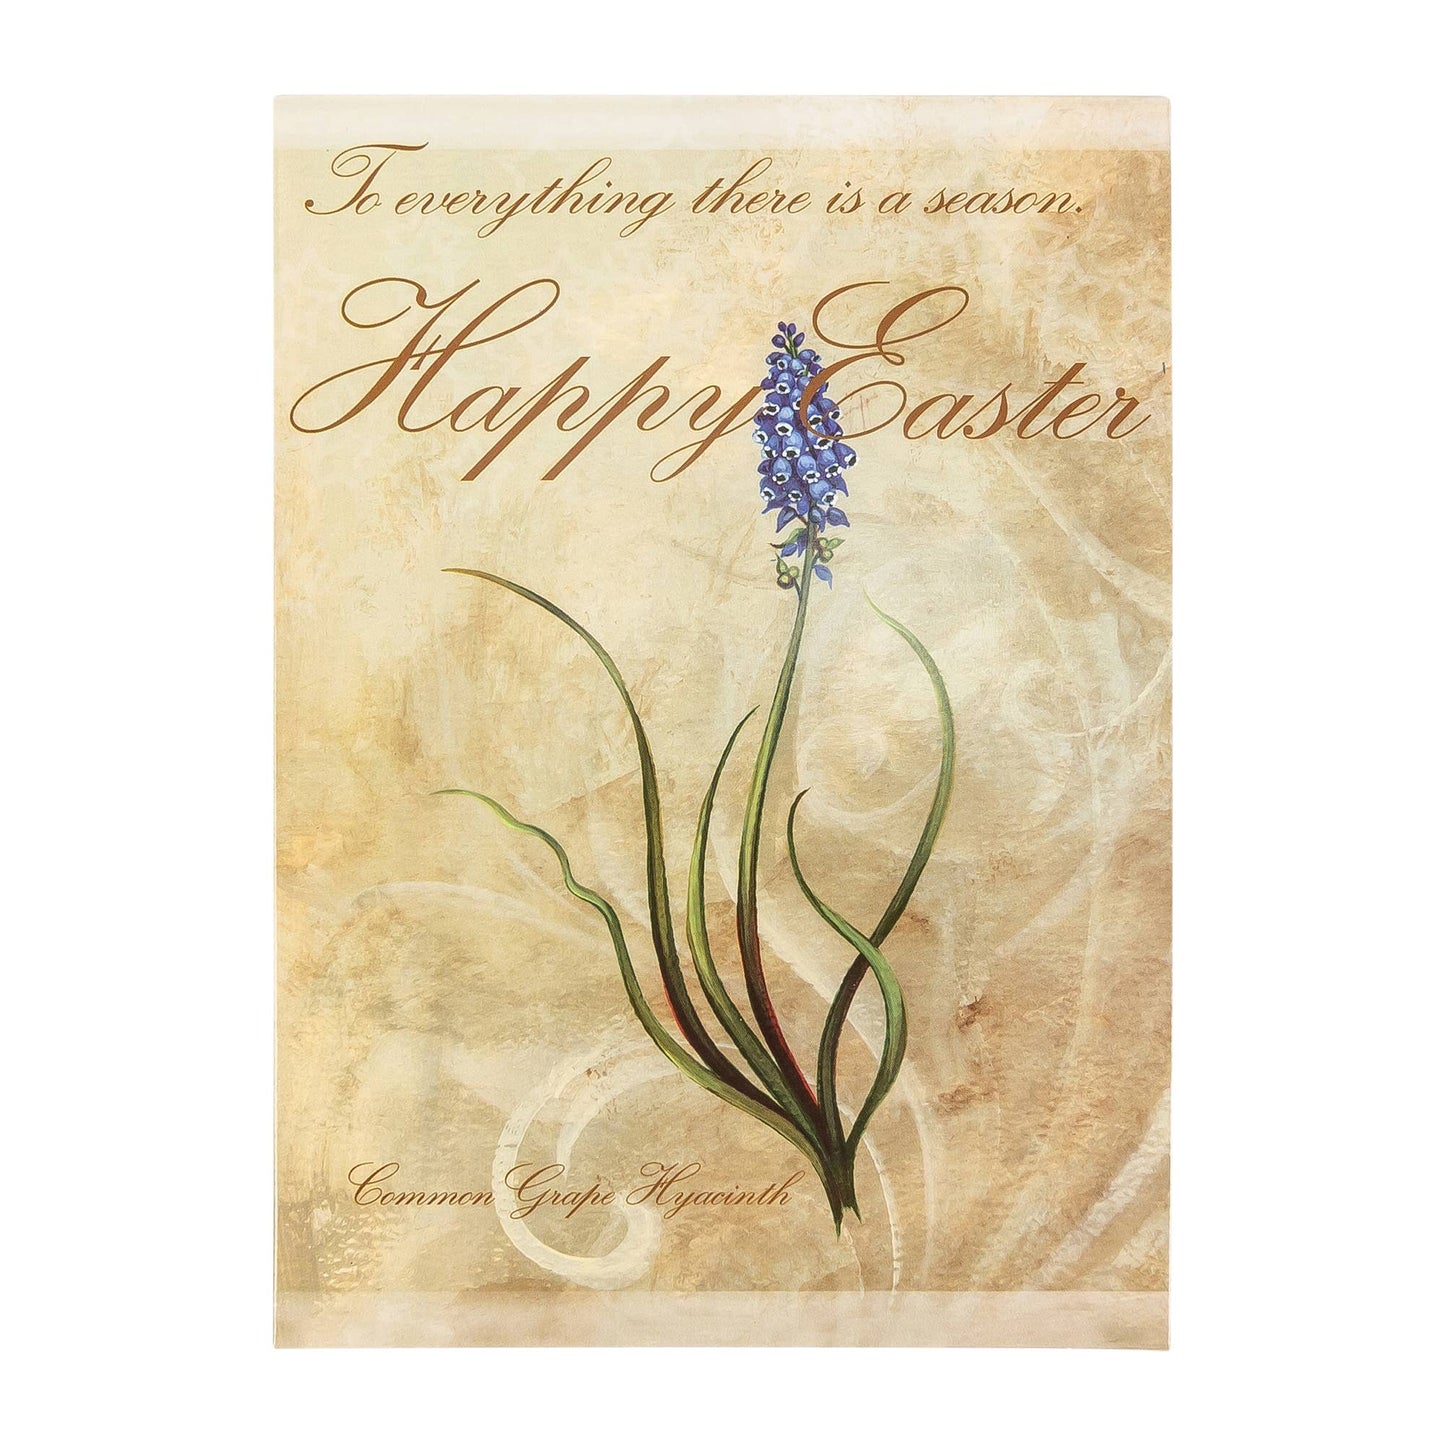 Divinity Boutique - Boxed Cards: Easter- Flowers